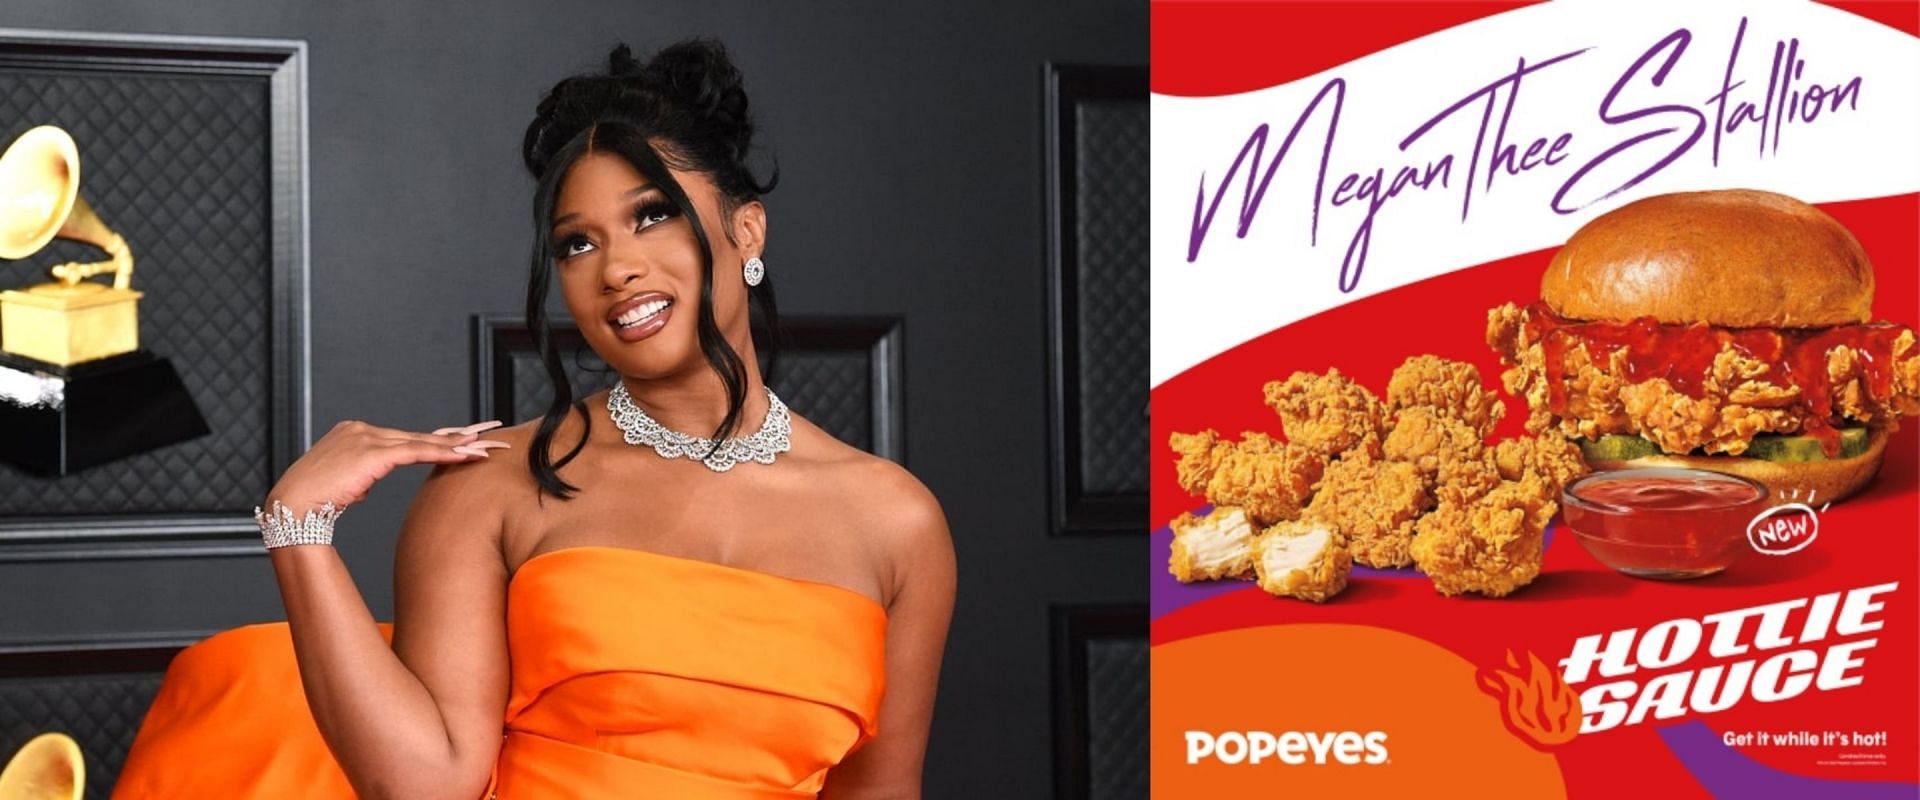 Meghan Thee Stallion X Popeyes collaboration (Image via Kevin Mazur/ Getty Images, and Business Wire)